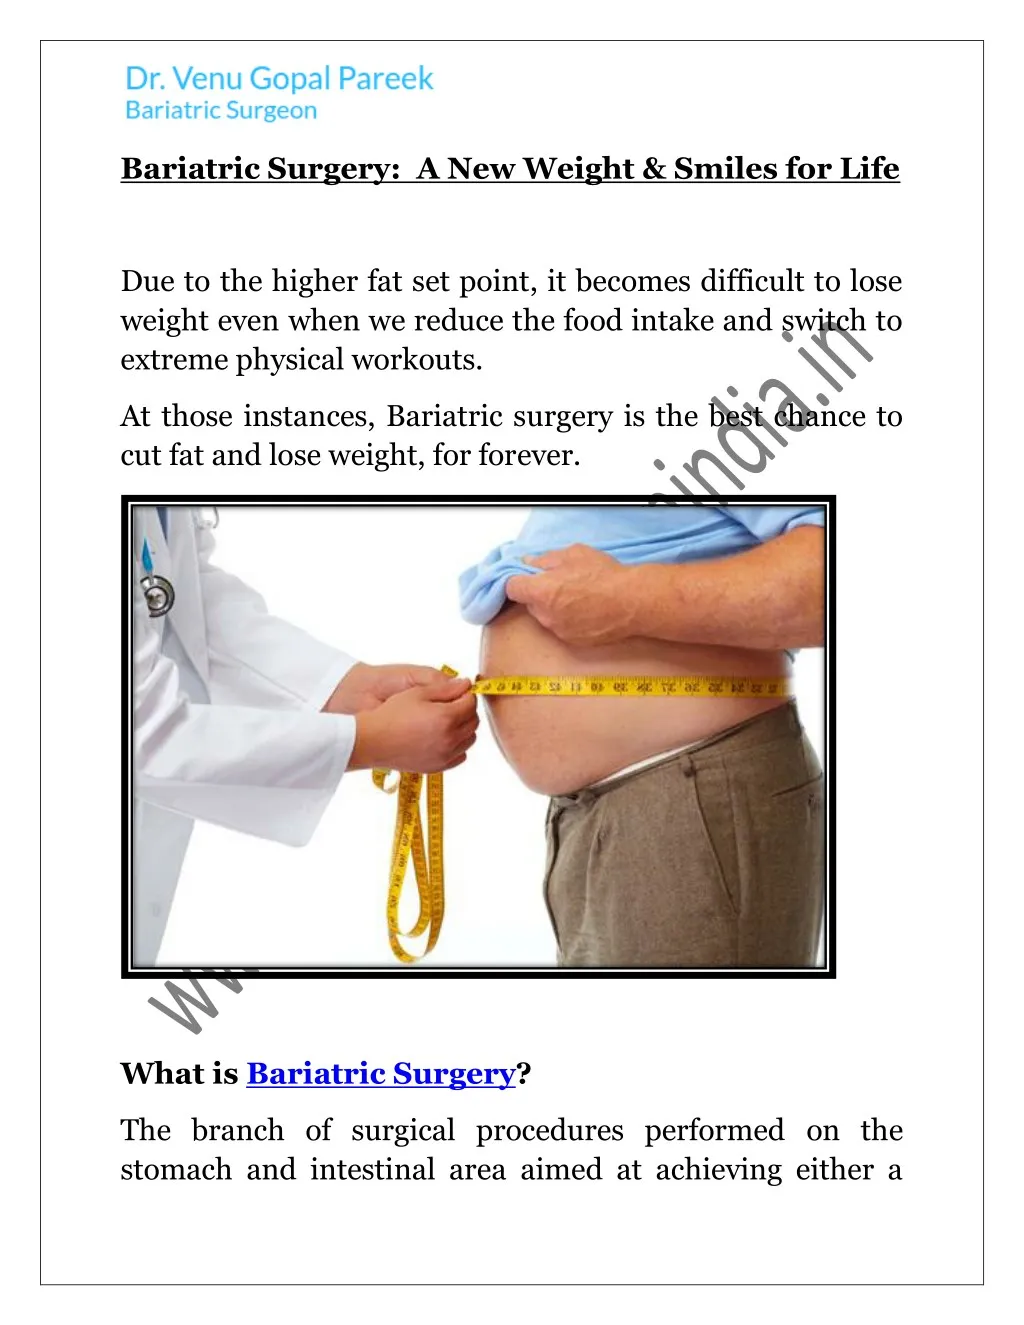 bariatric surgery a new weight smiles for life